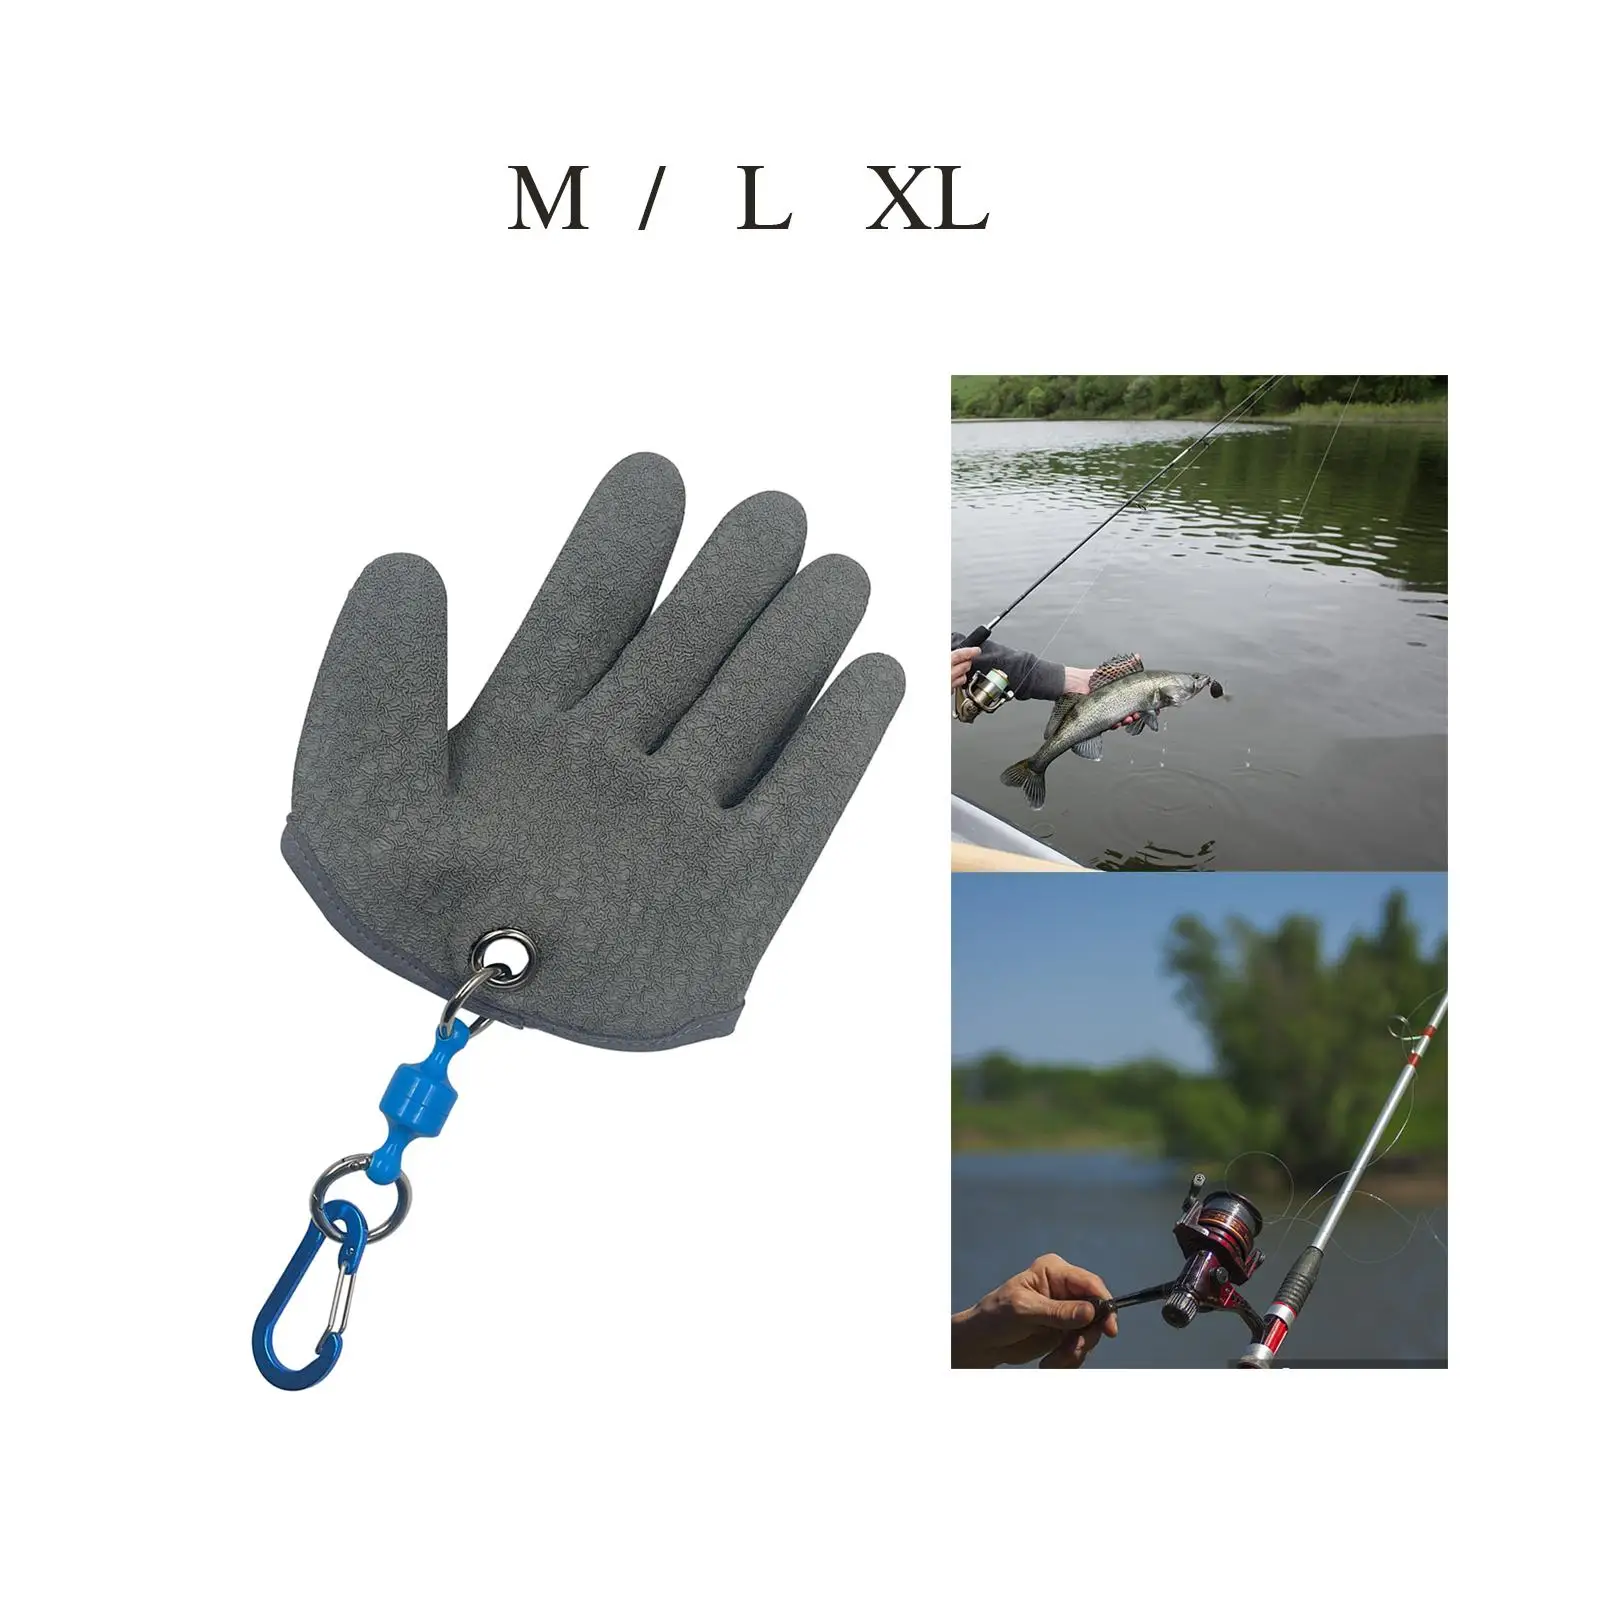 Left Hand Fish Glove Puncture Resistant Fishing Glove Cut Resistant Hands Protector for Outdoor Activities Cleaning Catch Fish